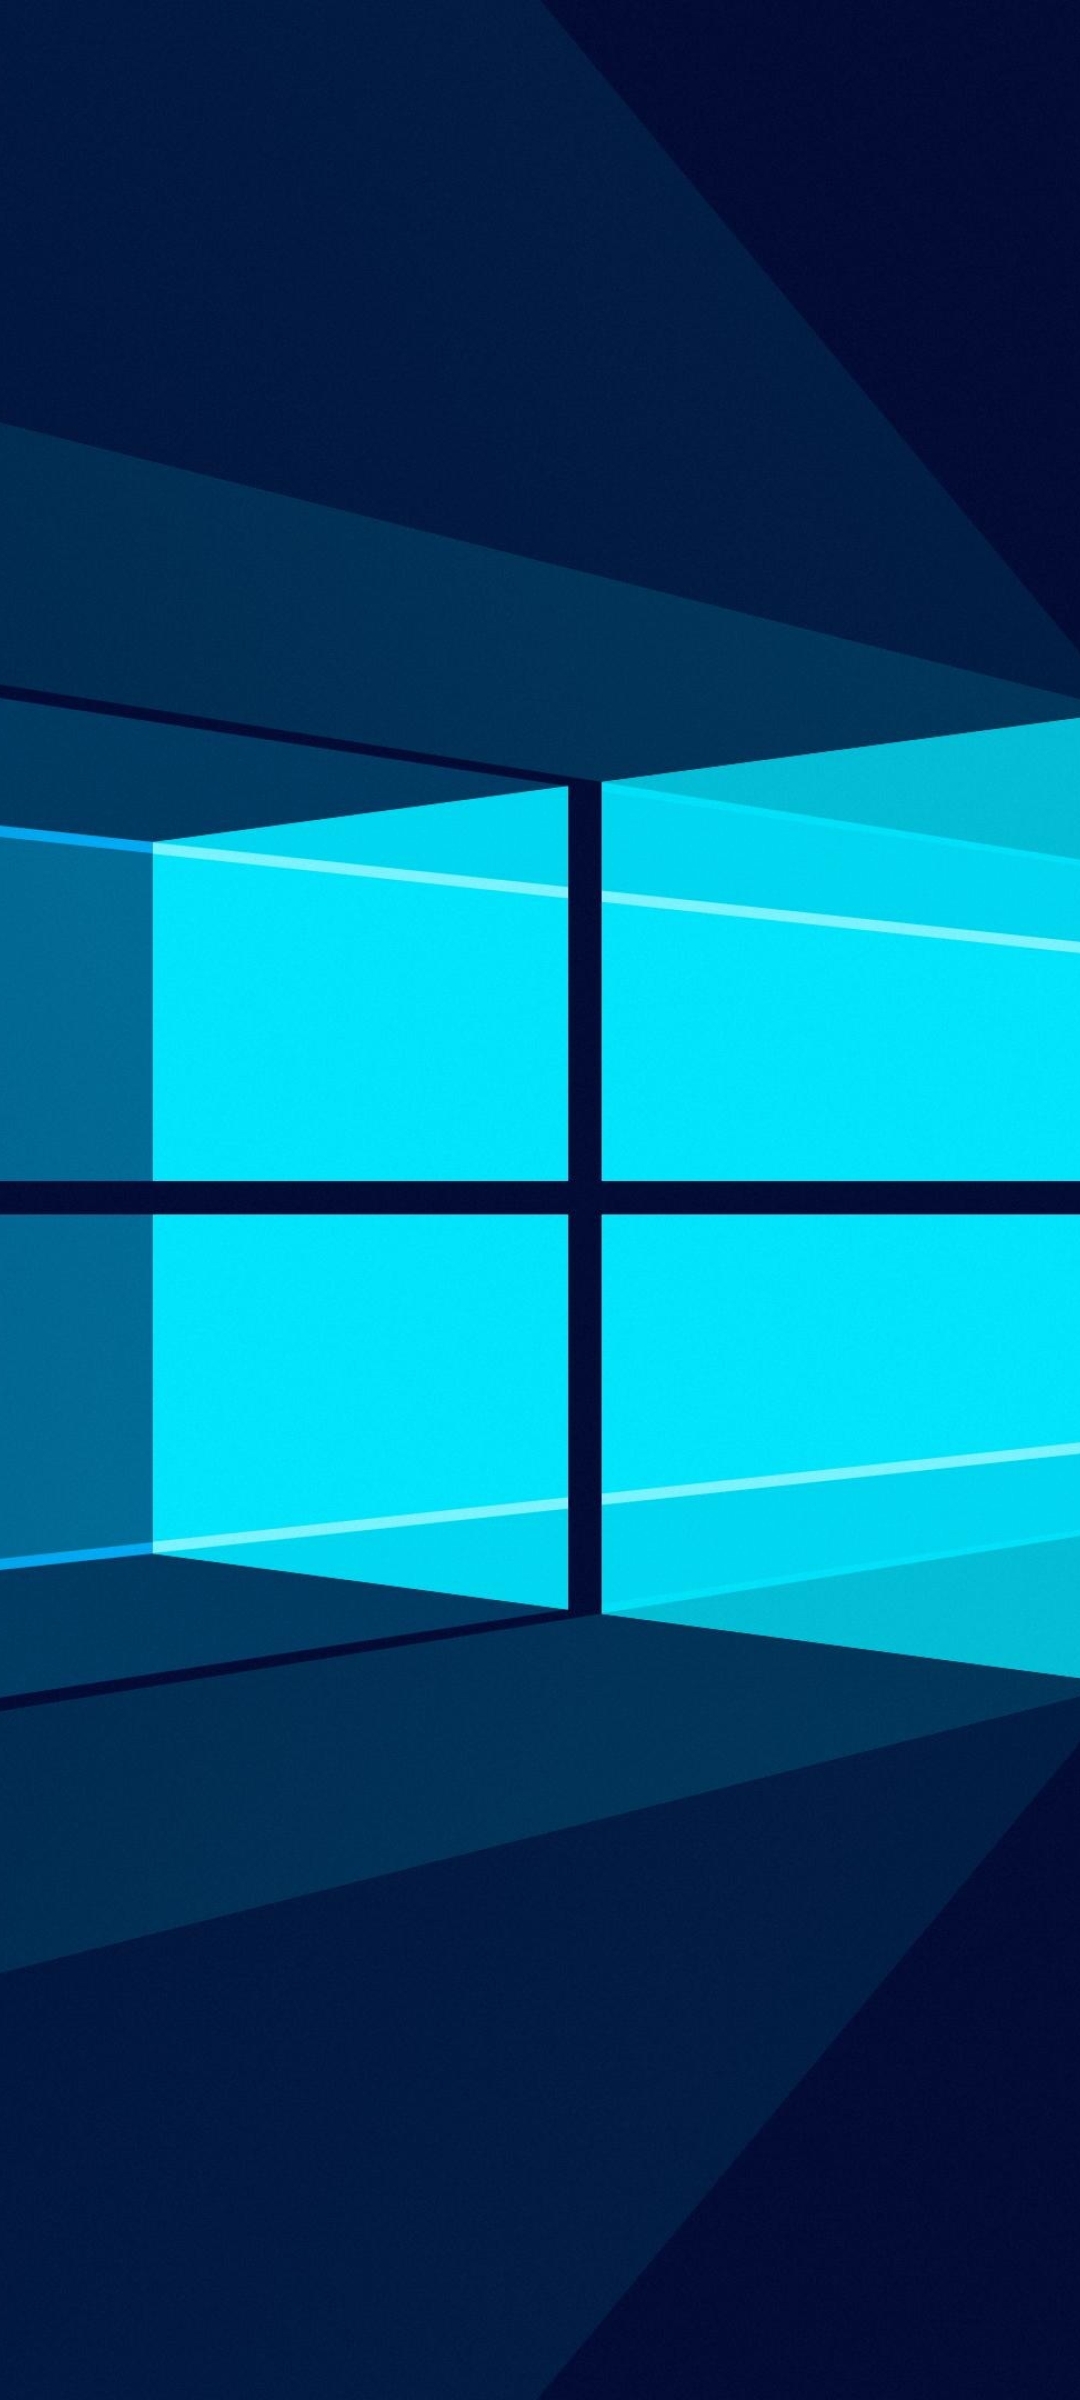 1080x2400 Windows 10 Minimal 1080x2400 Resolution Wallpaper Hd Minimalist 4k Wallpapers Images Photos And Background Wallpapers Den